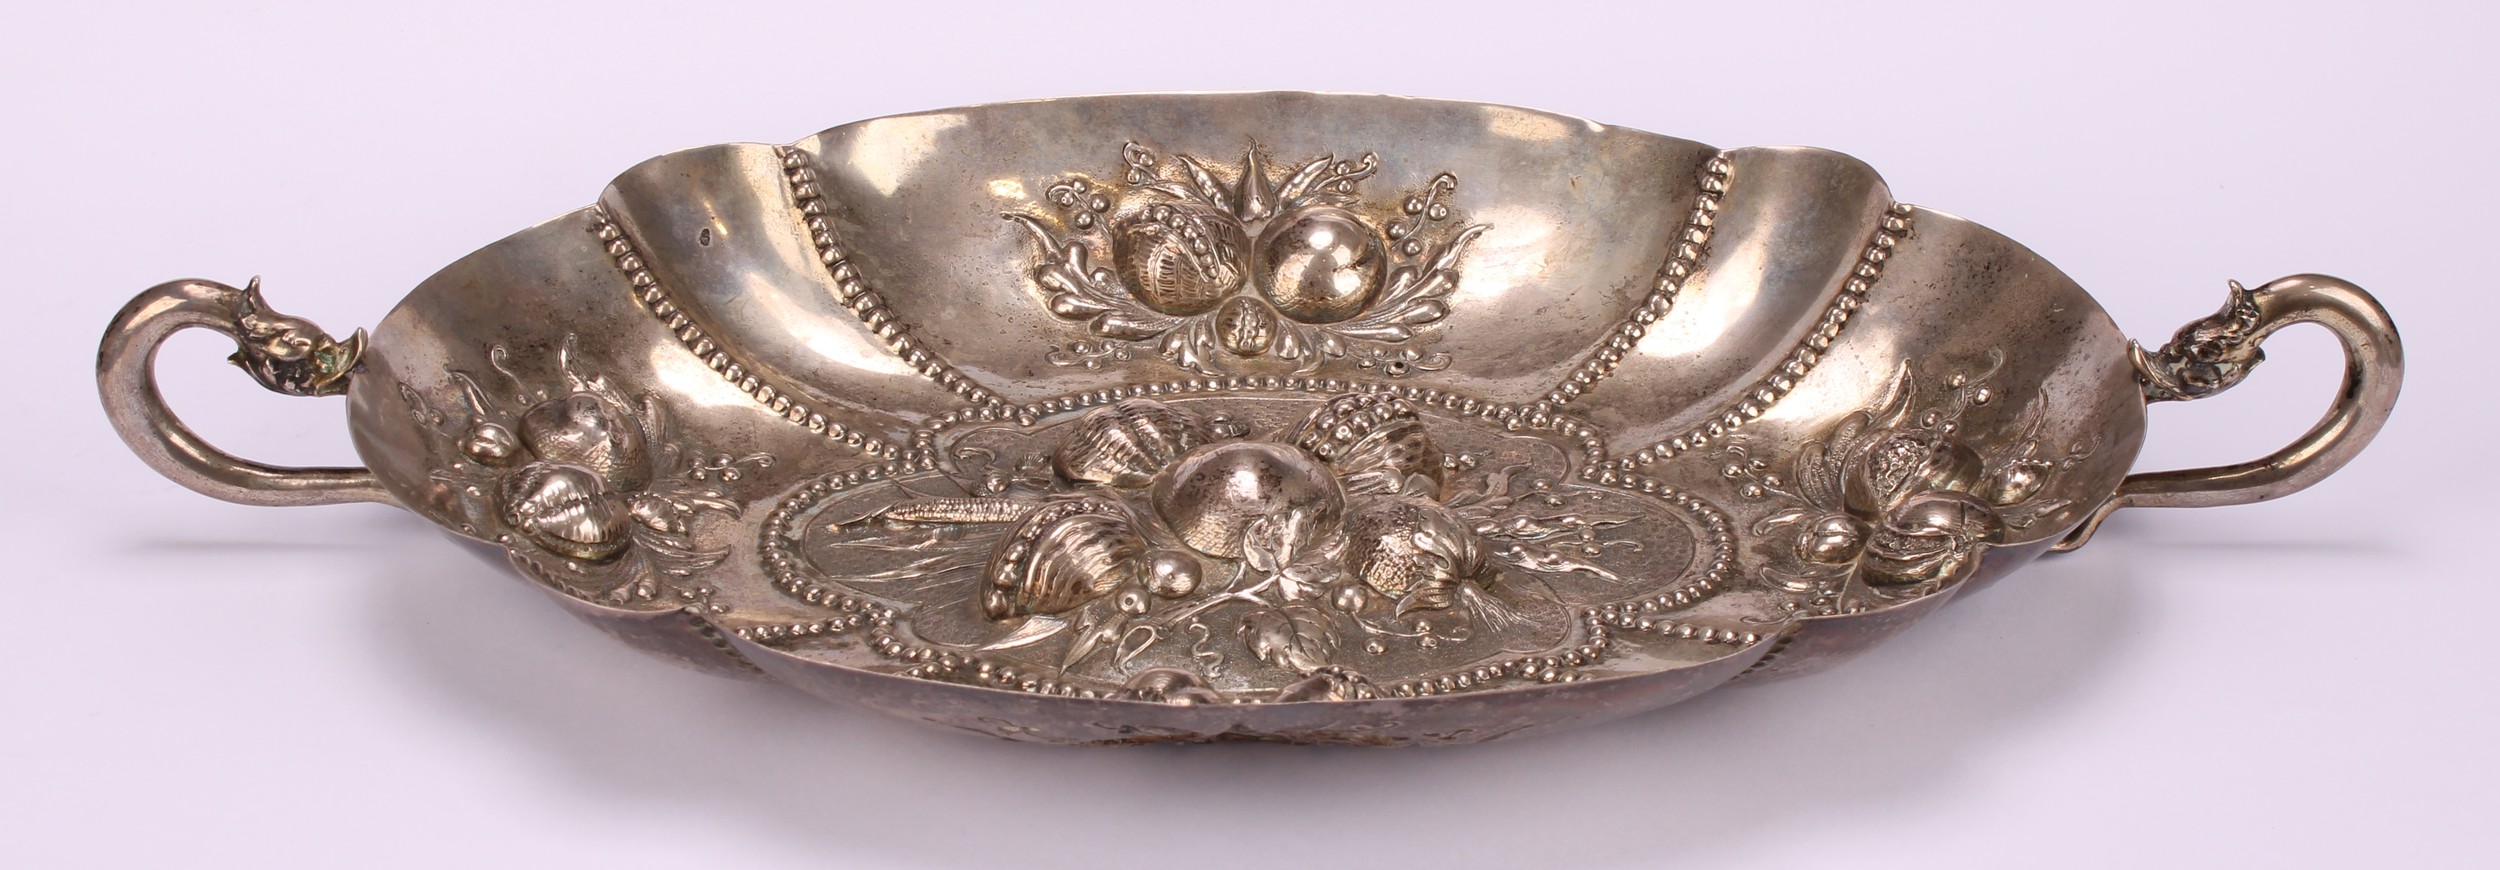 A German silver shaped oval fruit dish, chased in bold relief with leaves and ripe fruit, rustic - Image 2 of 3